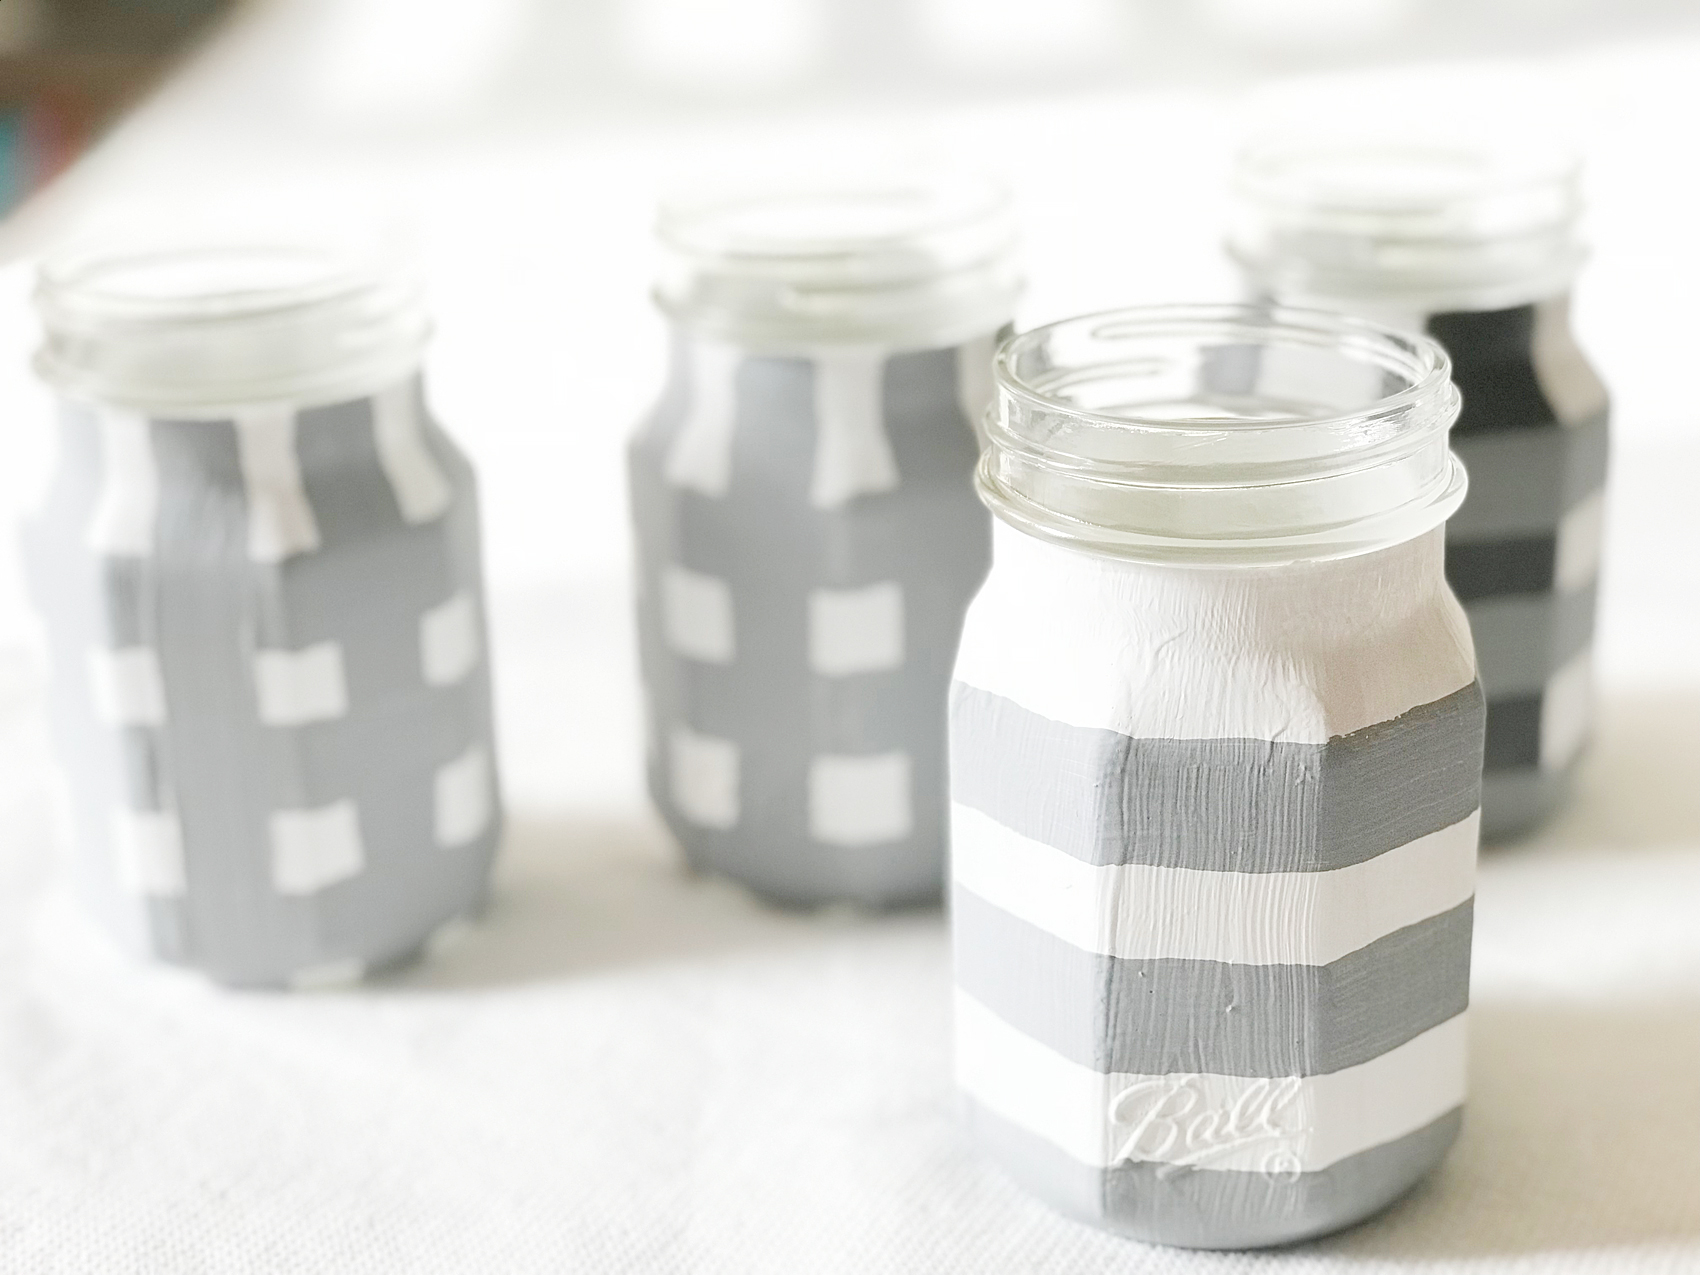 Love the Buffalo Check trend? Yep, me too! I thought it would be fun to use some of the Ball® Giving Jars to create some Buffalo Check Jars to use as gifts this Holiday Season. Here's how you can make some of your own. 